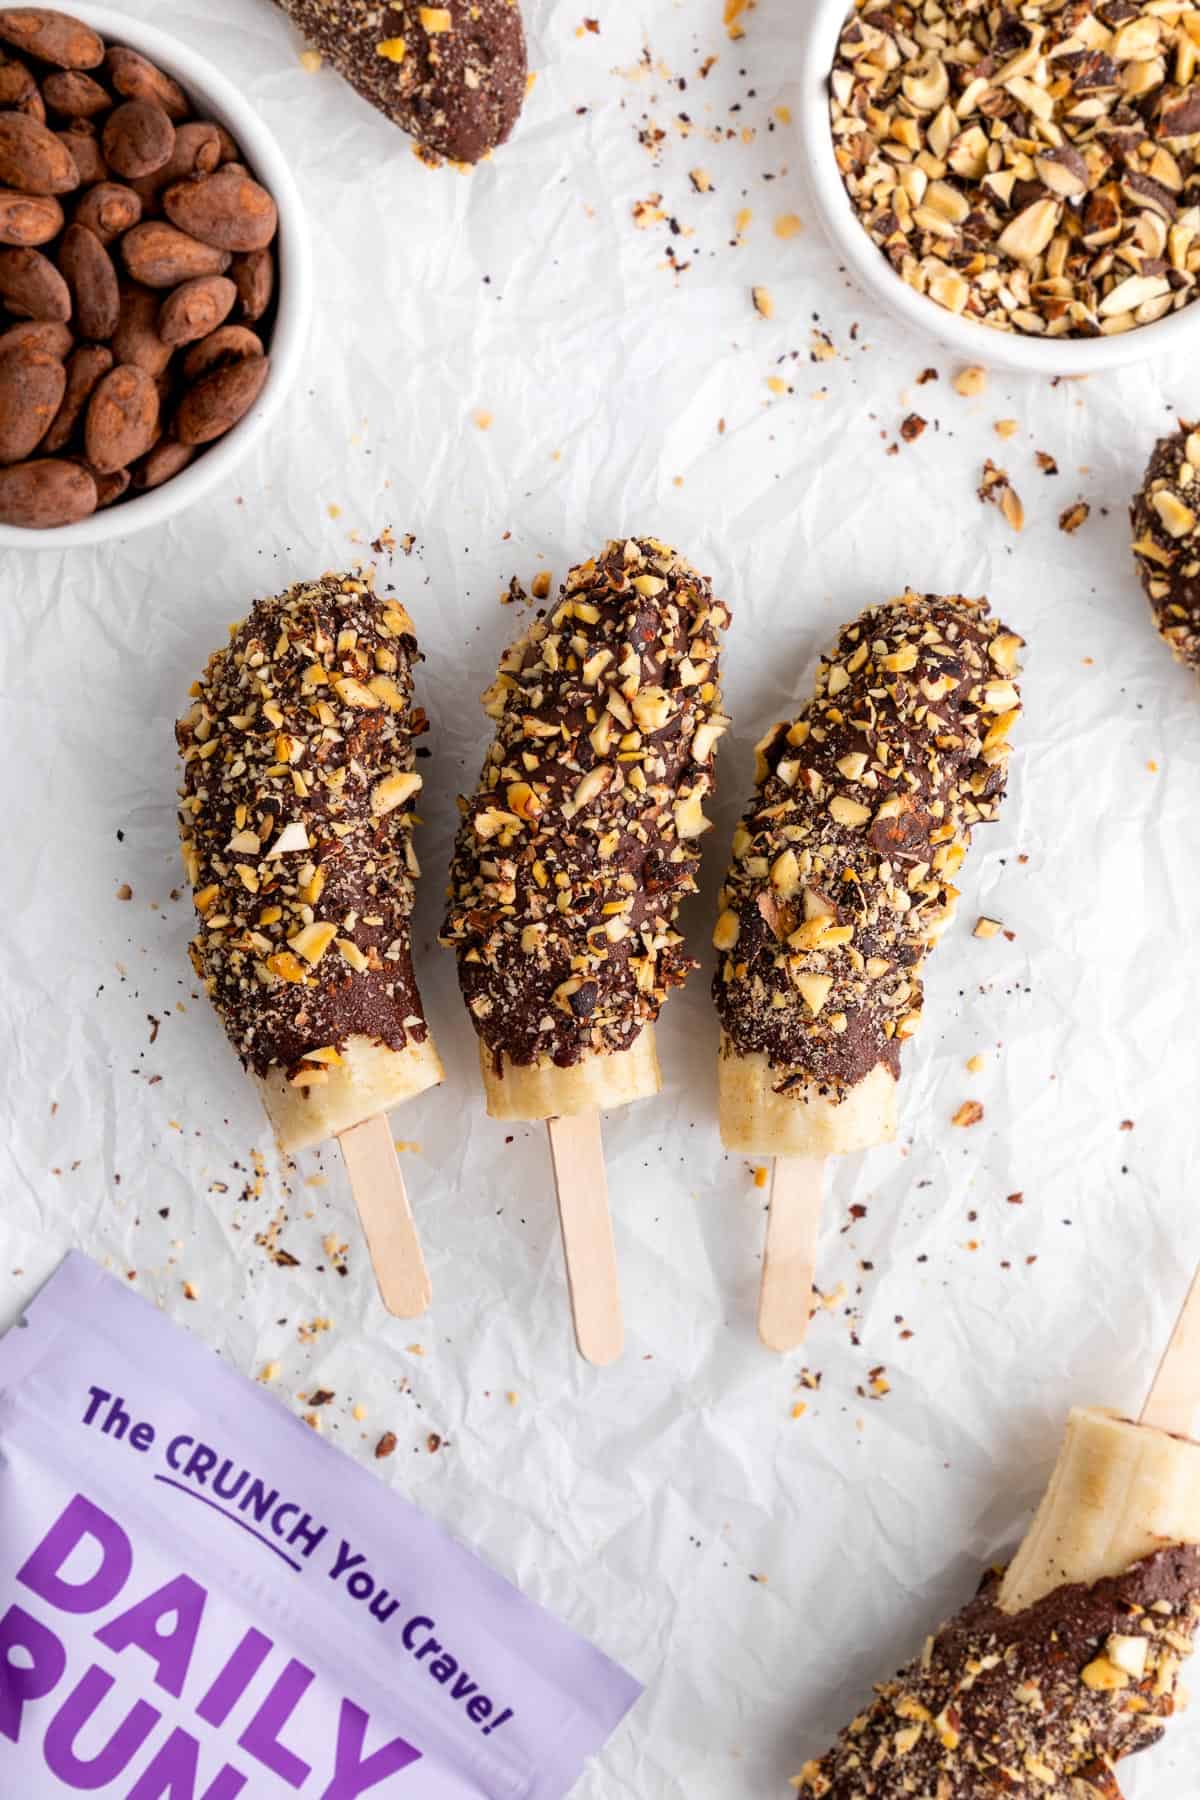 three chocolate covered frozen bananas on popsicle sticks coated in crushed nuts